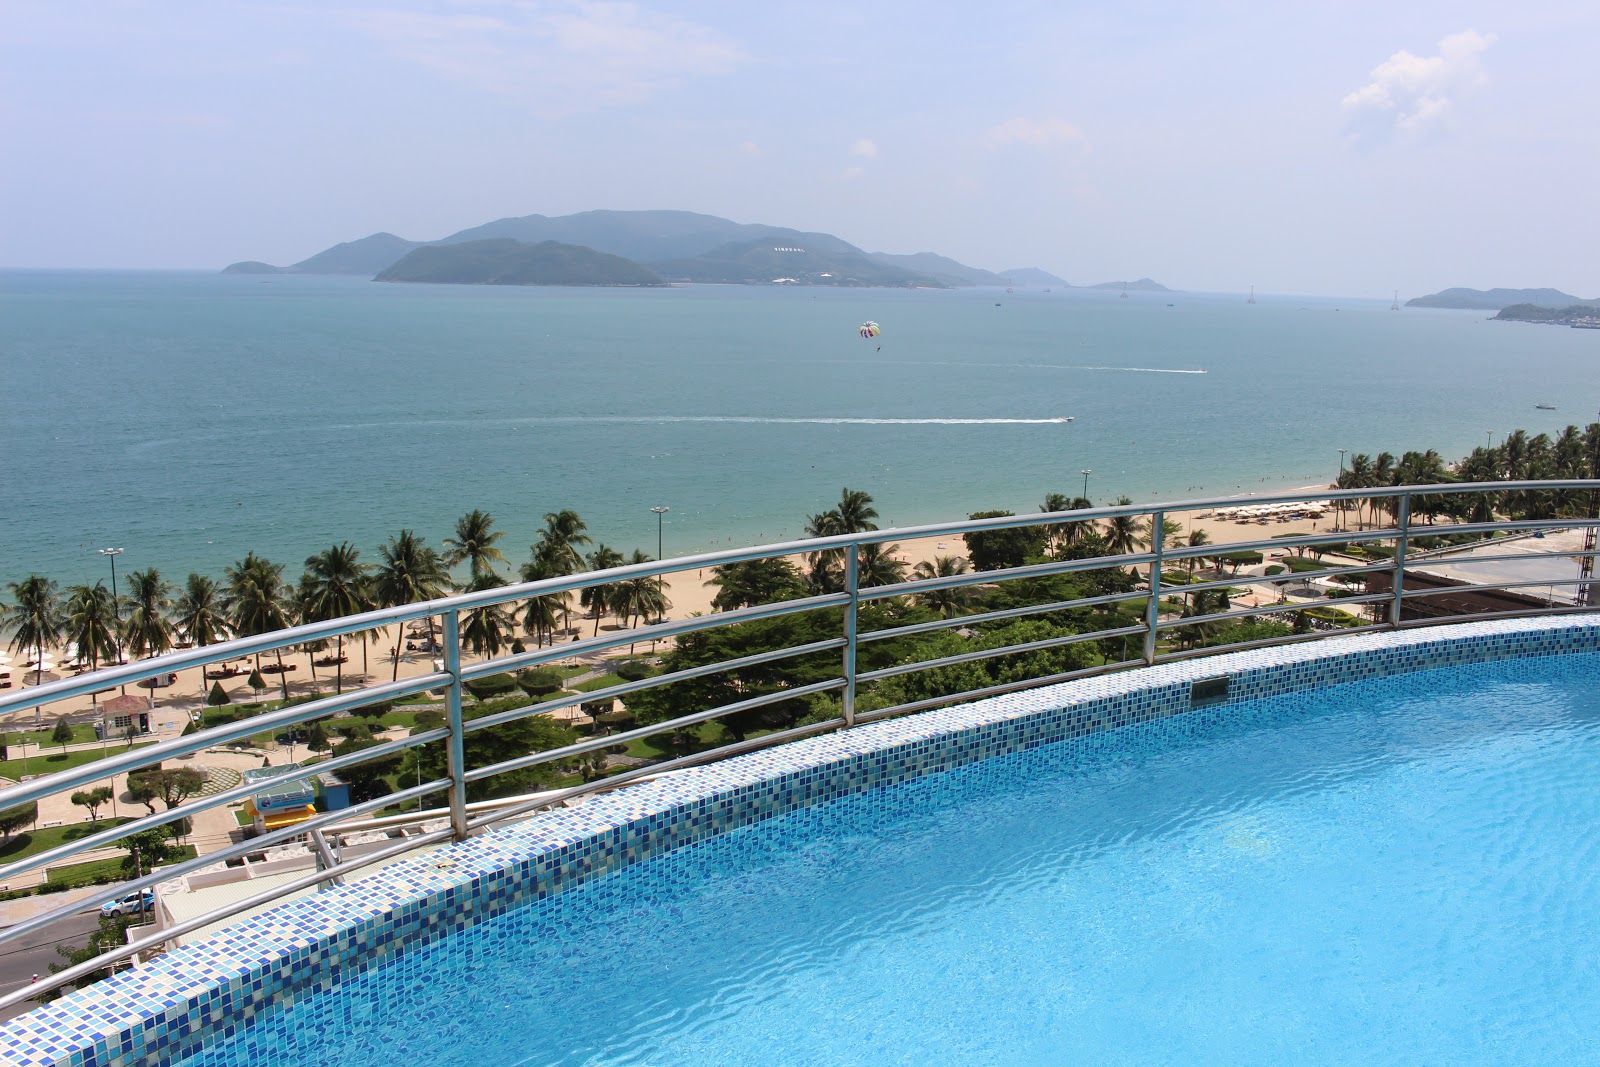 Where to Stay in Nha Trang, Vietnam